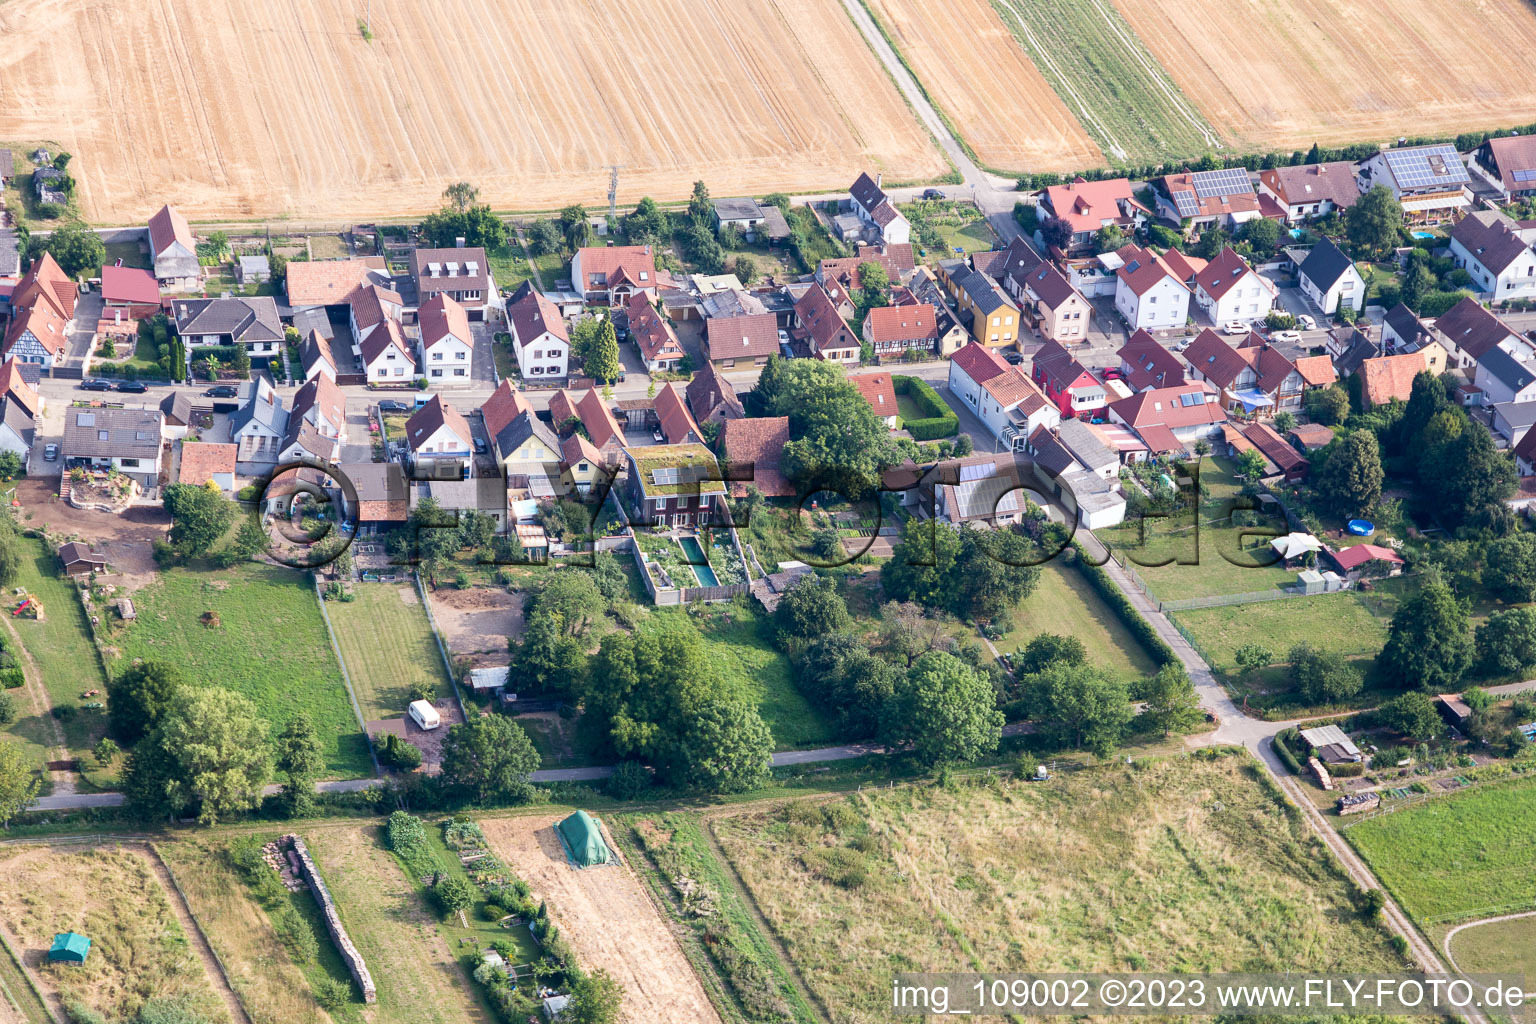 Freckenfeld in the state Rhineland-Palatinate, Germany seen from above